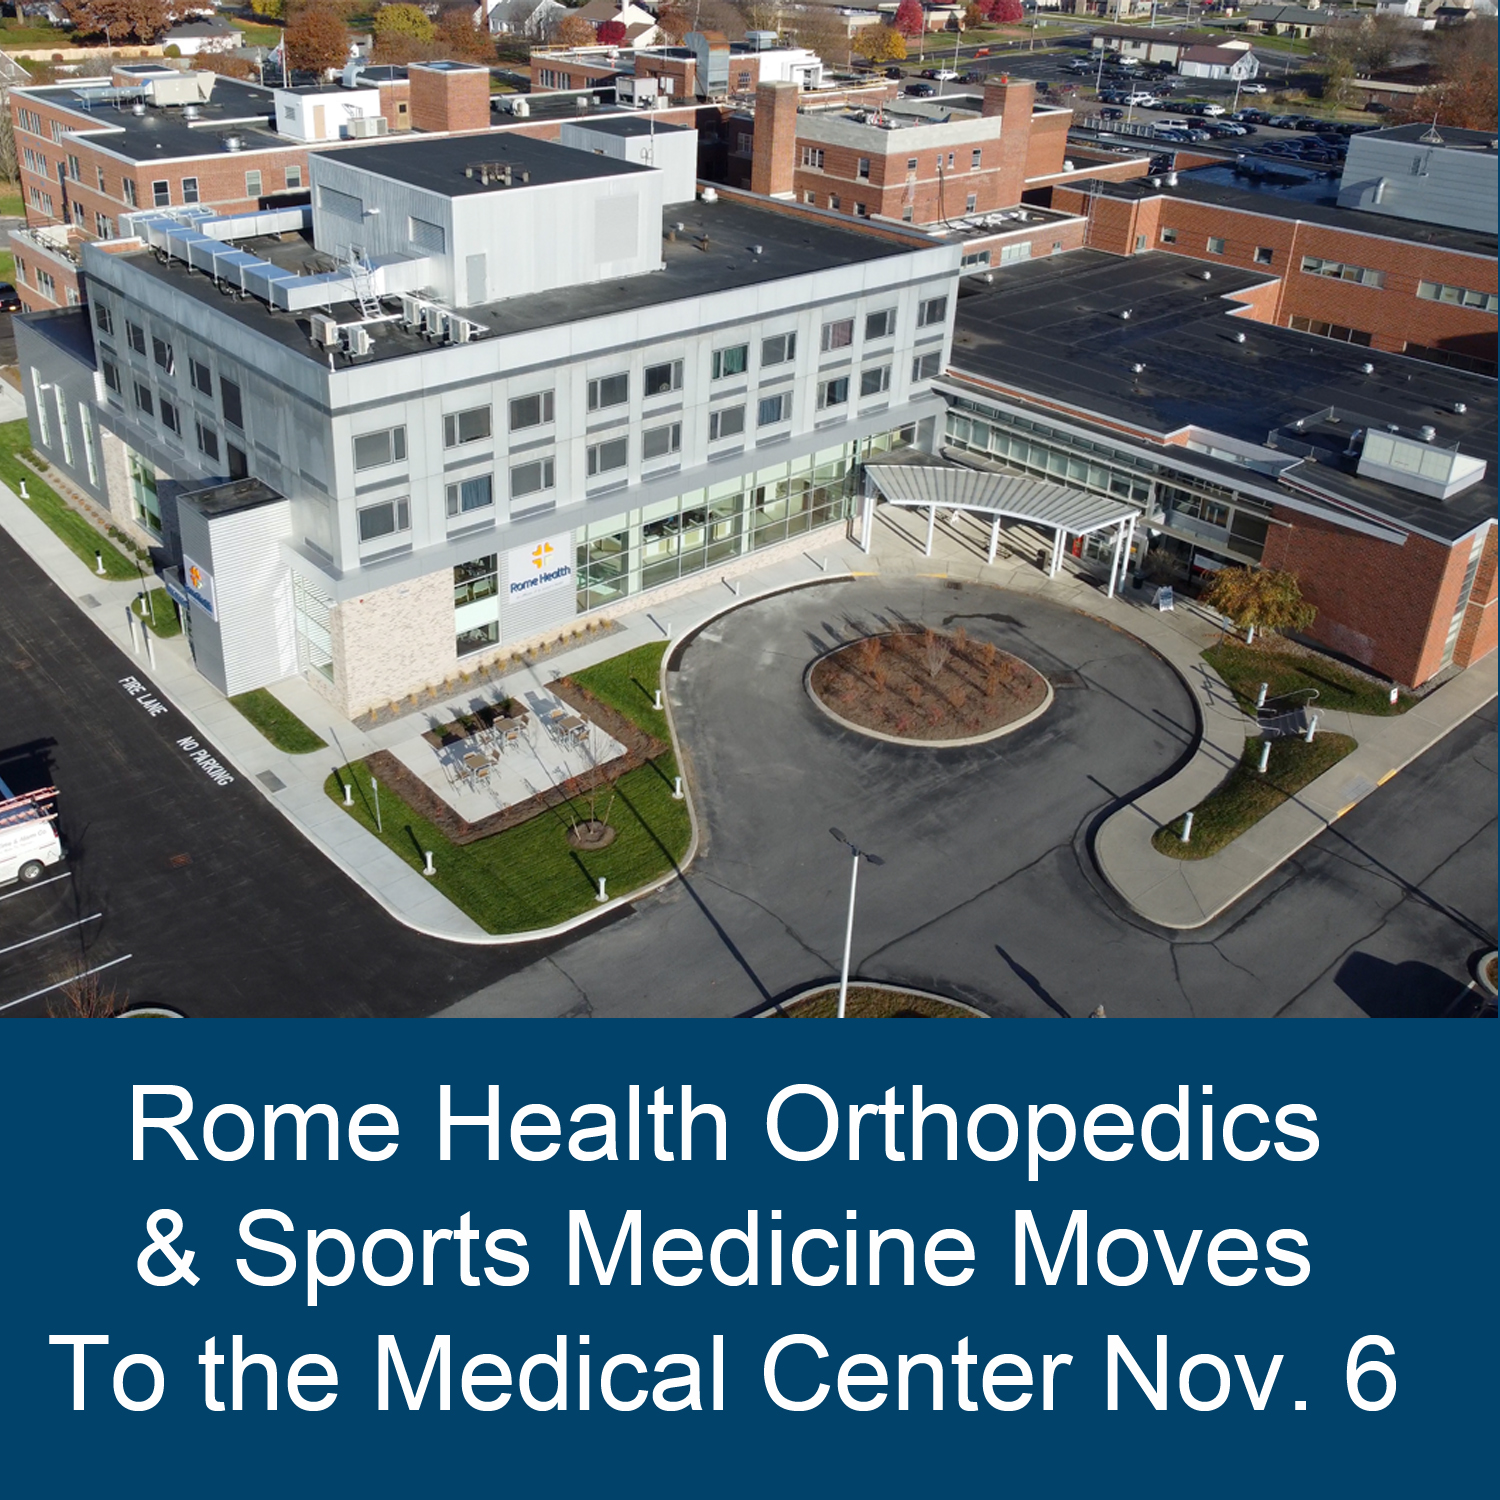 Rome Health Orthopedics and Sports Medicine Moves to the Medical Center Nov. 6